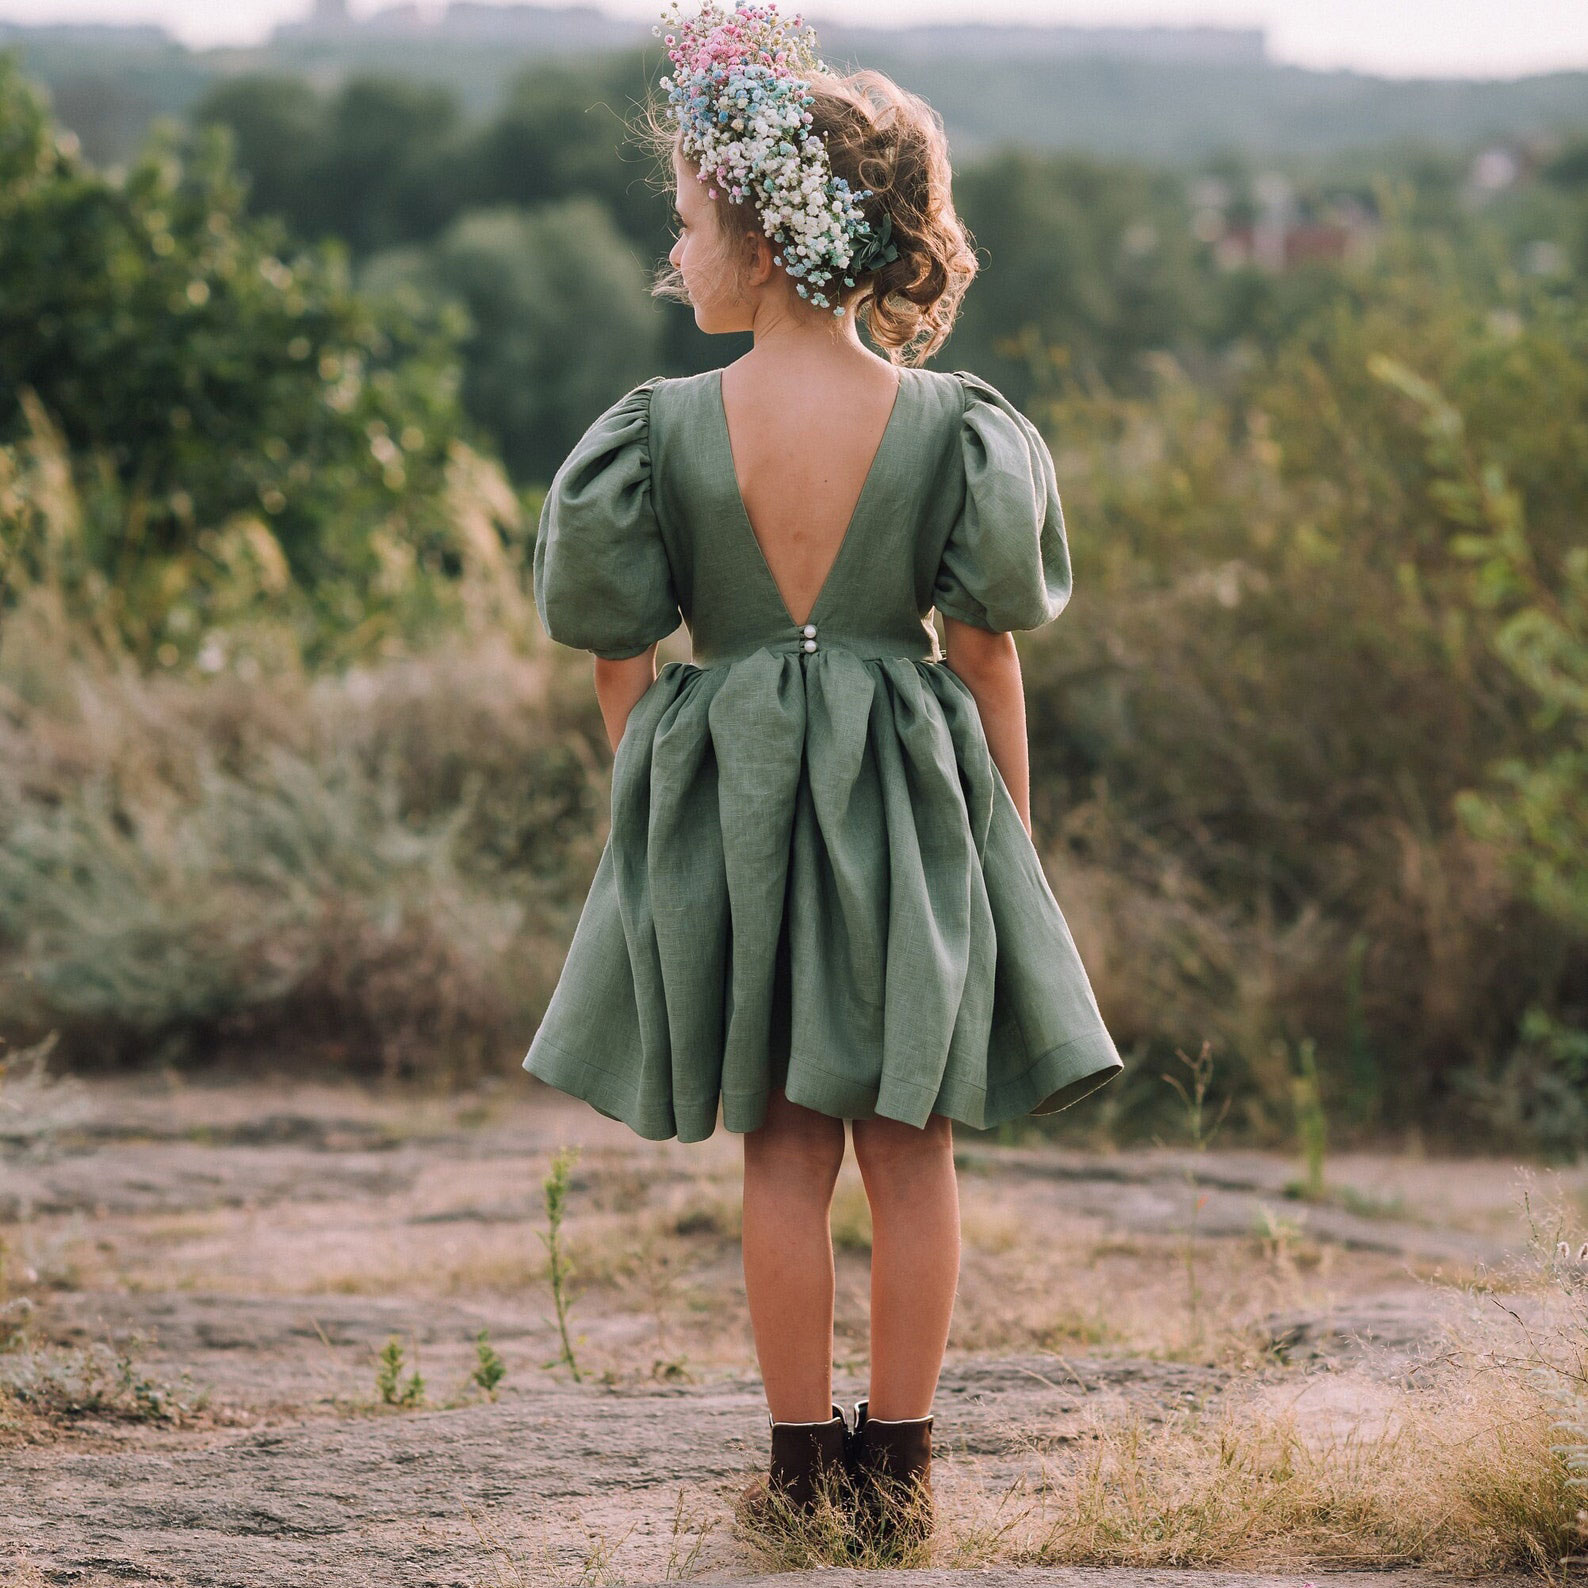 65 Colorful Wedding Dresses We Love From Real Weddings